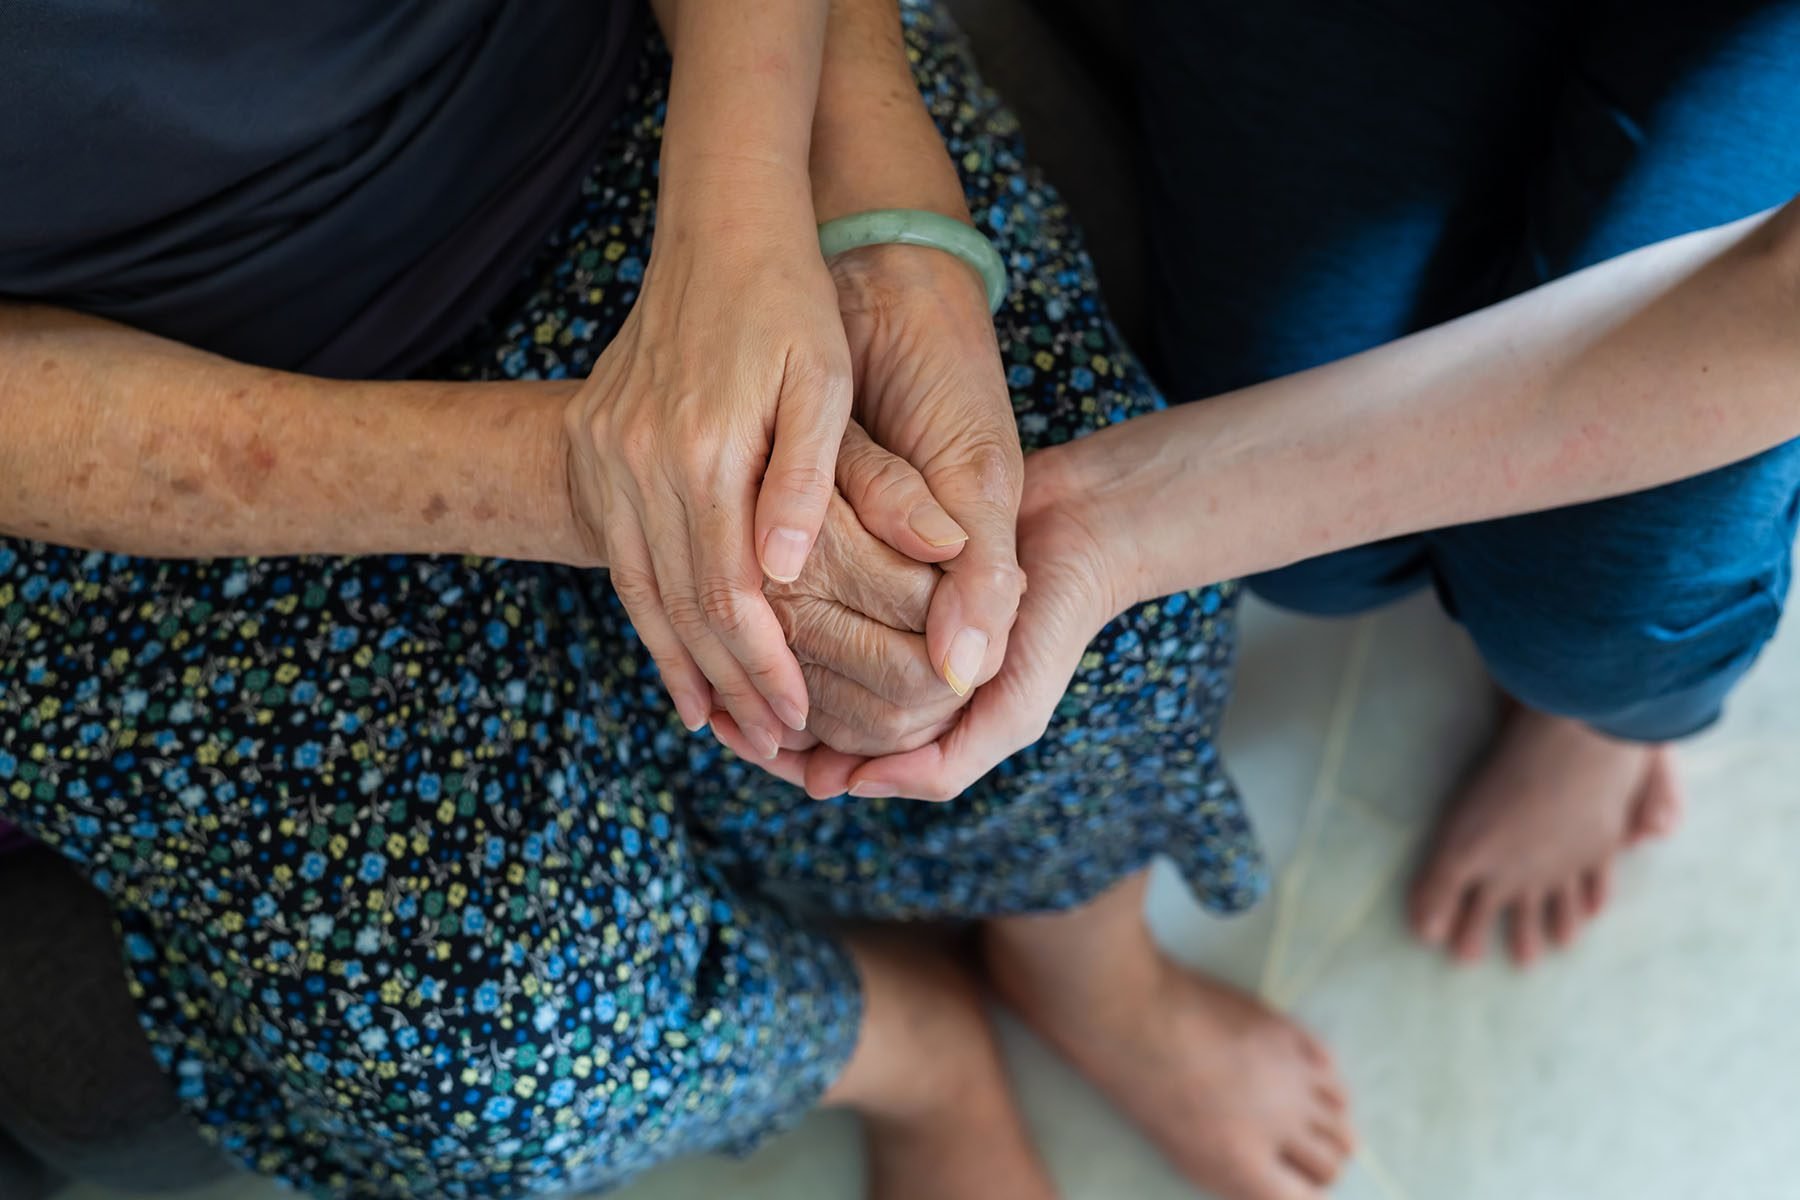 A daughter holds her elderly mother's hands.